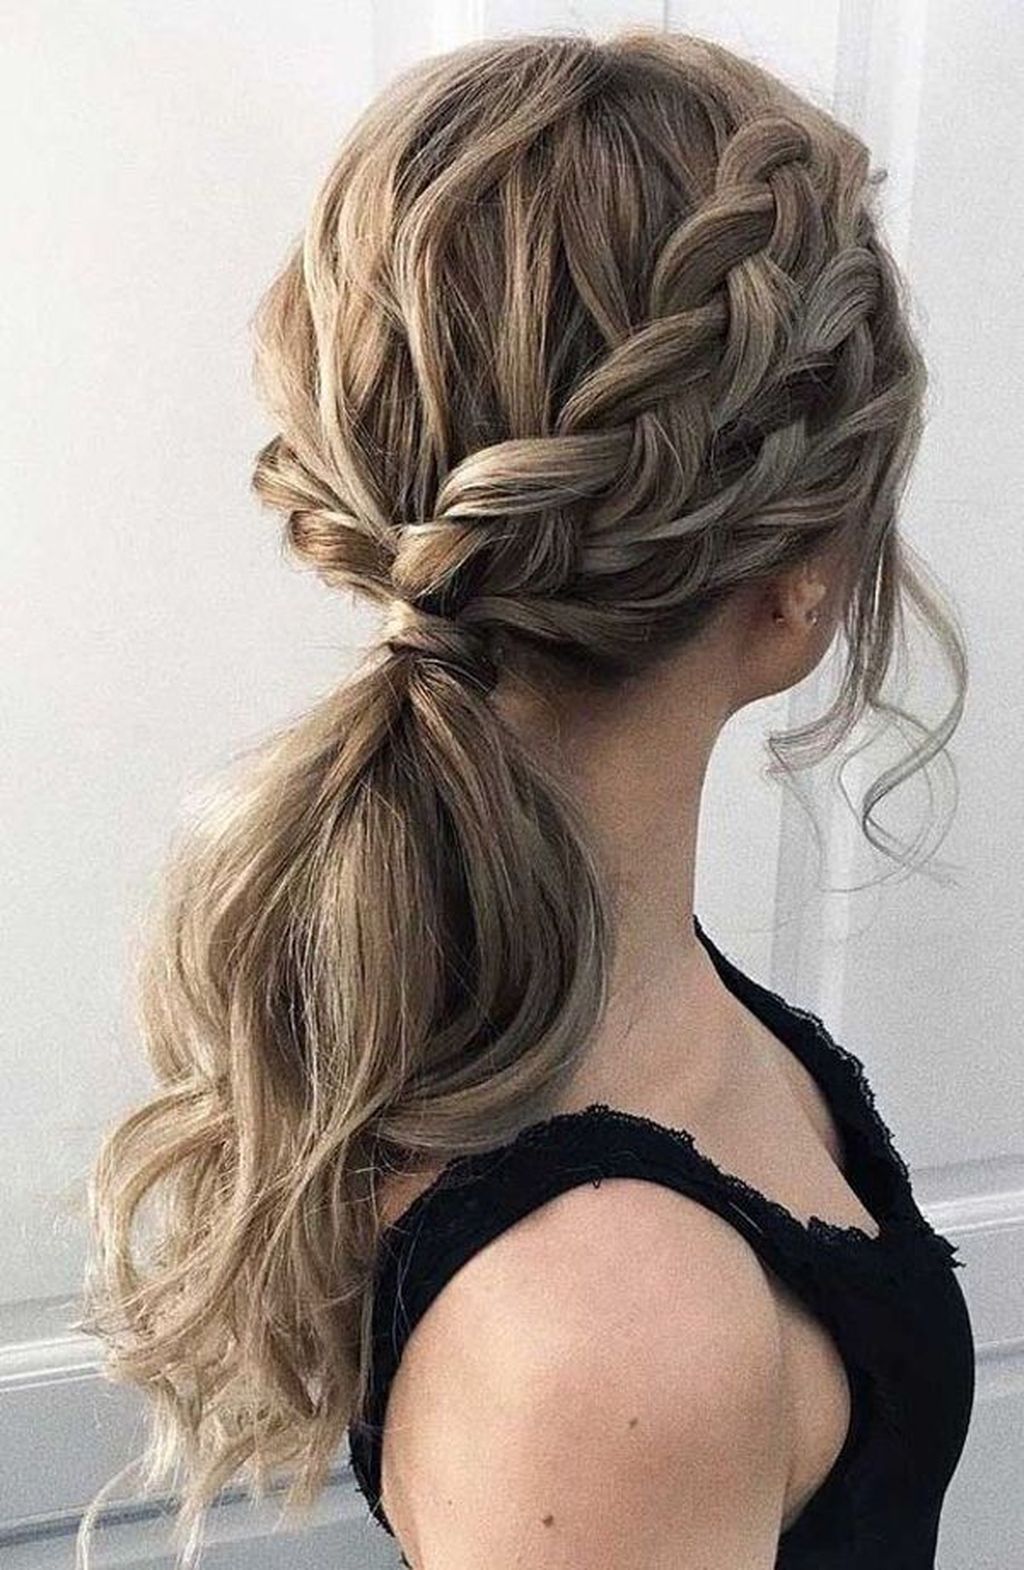 44 Classy Prom Hairstyles Ideas To Try Asap -   7 prom hairstyles DIY ideas